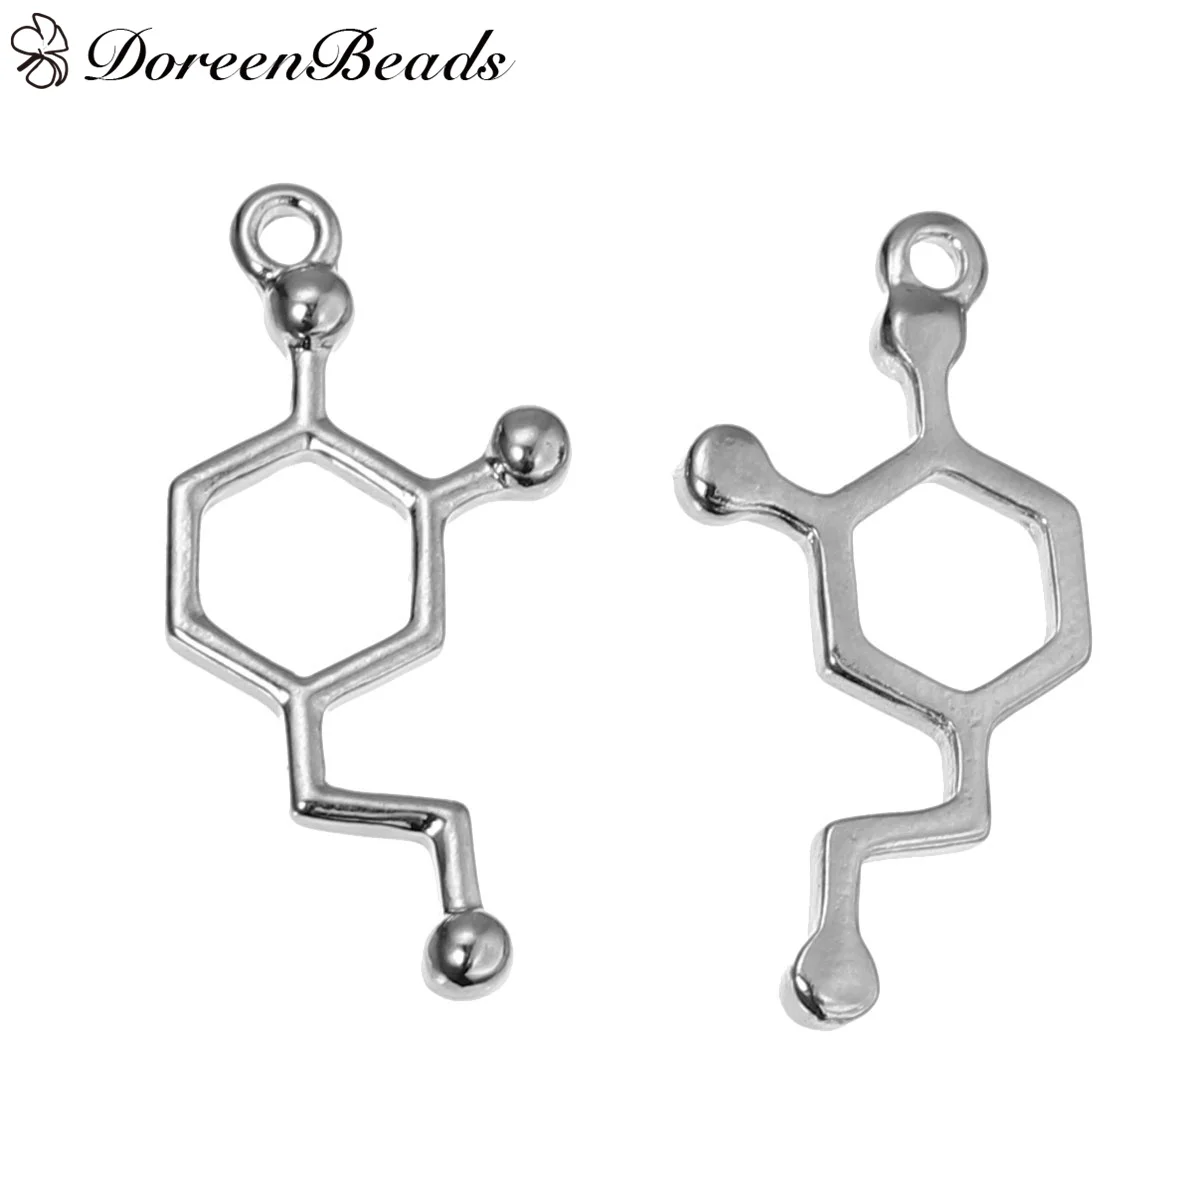 

DoreenBeads Alloy Molecule Chemistry Science Charms Dopamine dull silver color 25mm(1") x 12mm( 4/8"), 10 PCs